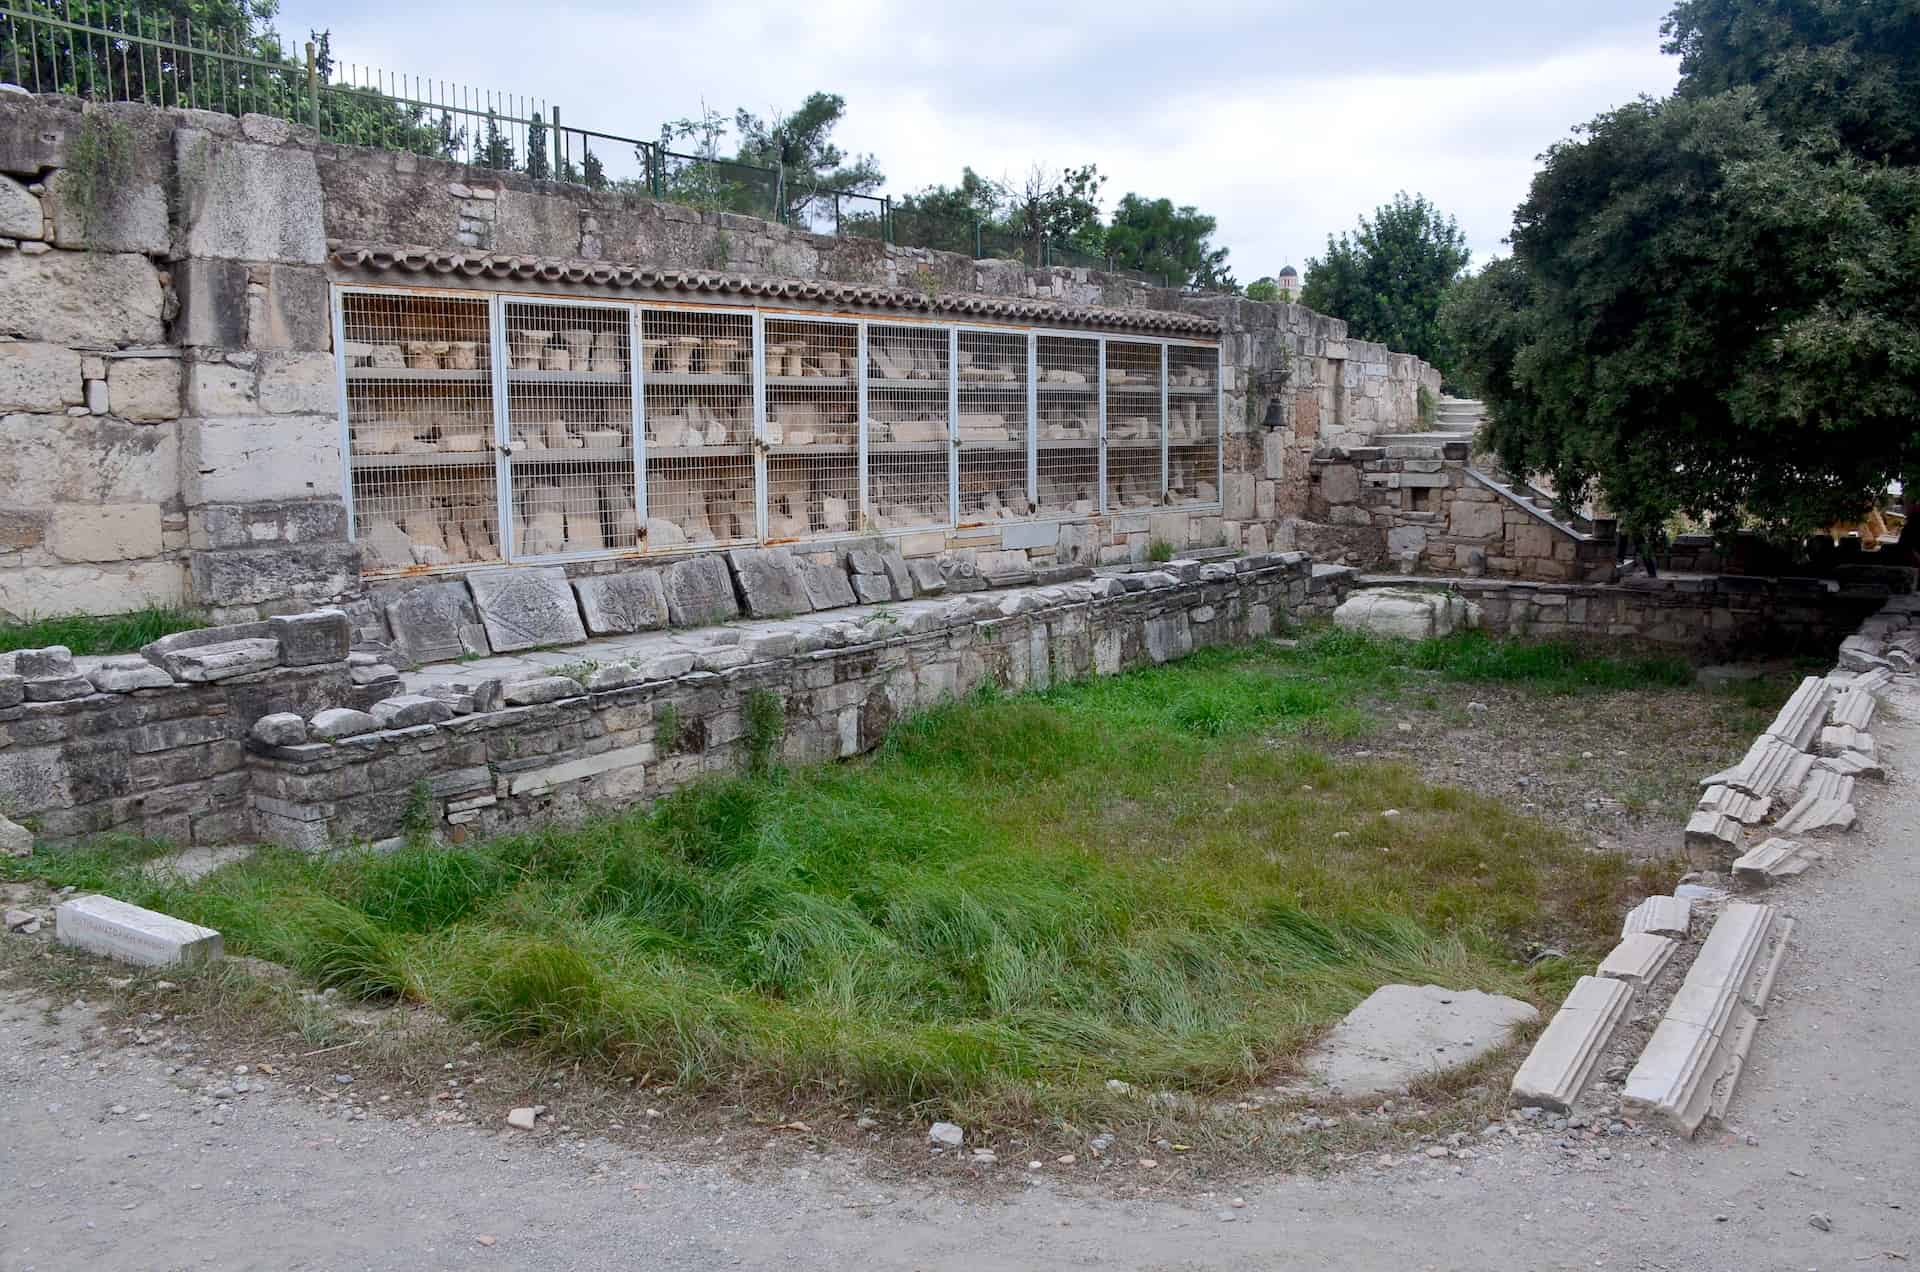 Southeast Fountain House at the Ancient Agora of Athens